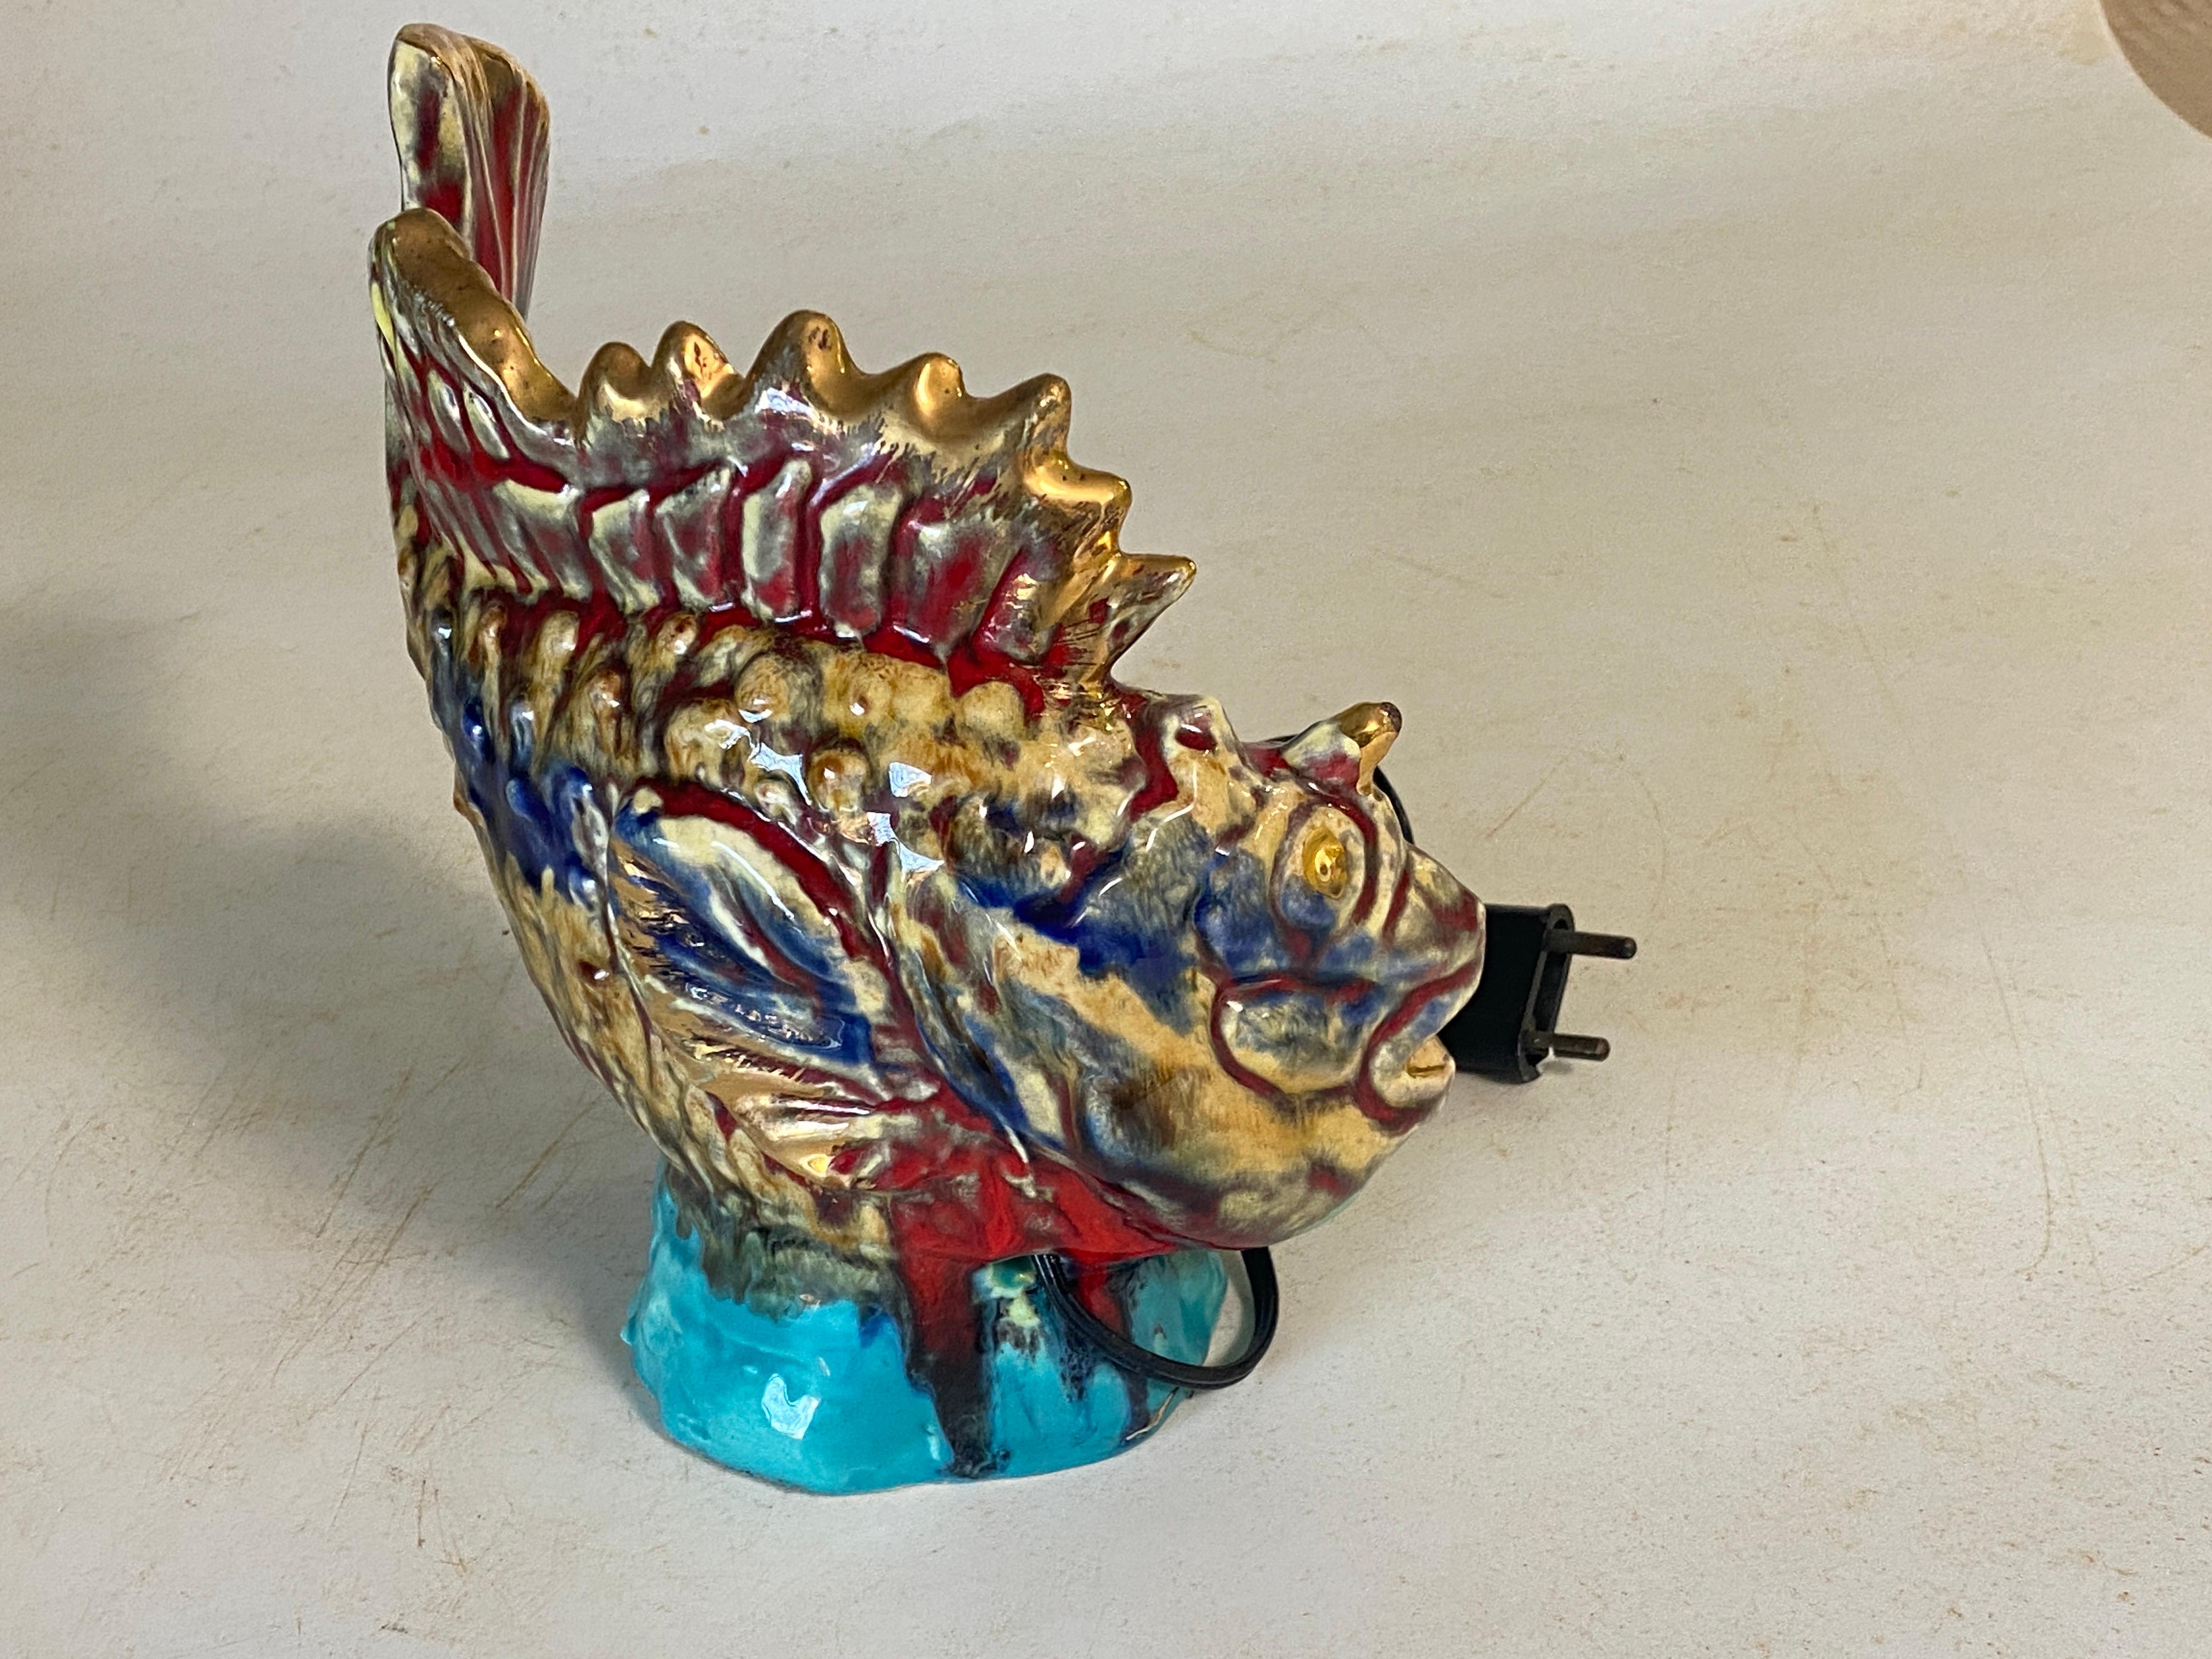 Shellfish French 1960 Table Lamp in Ceramic Representing a Fish Vallauris
This can be use as a Decorative Garniture.
Vallauris & Monaco, France, Table Lamp in Glazed Ceramics Shaped like a Fish